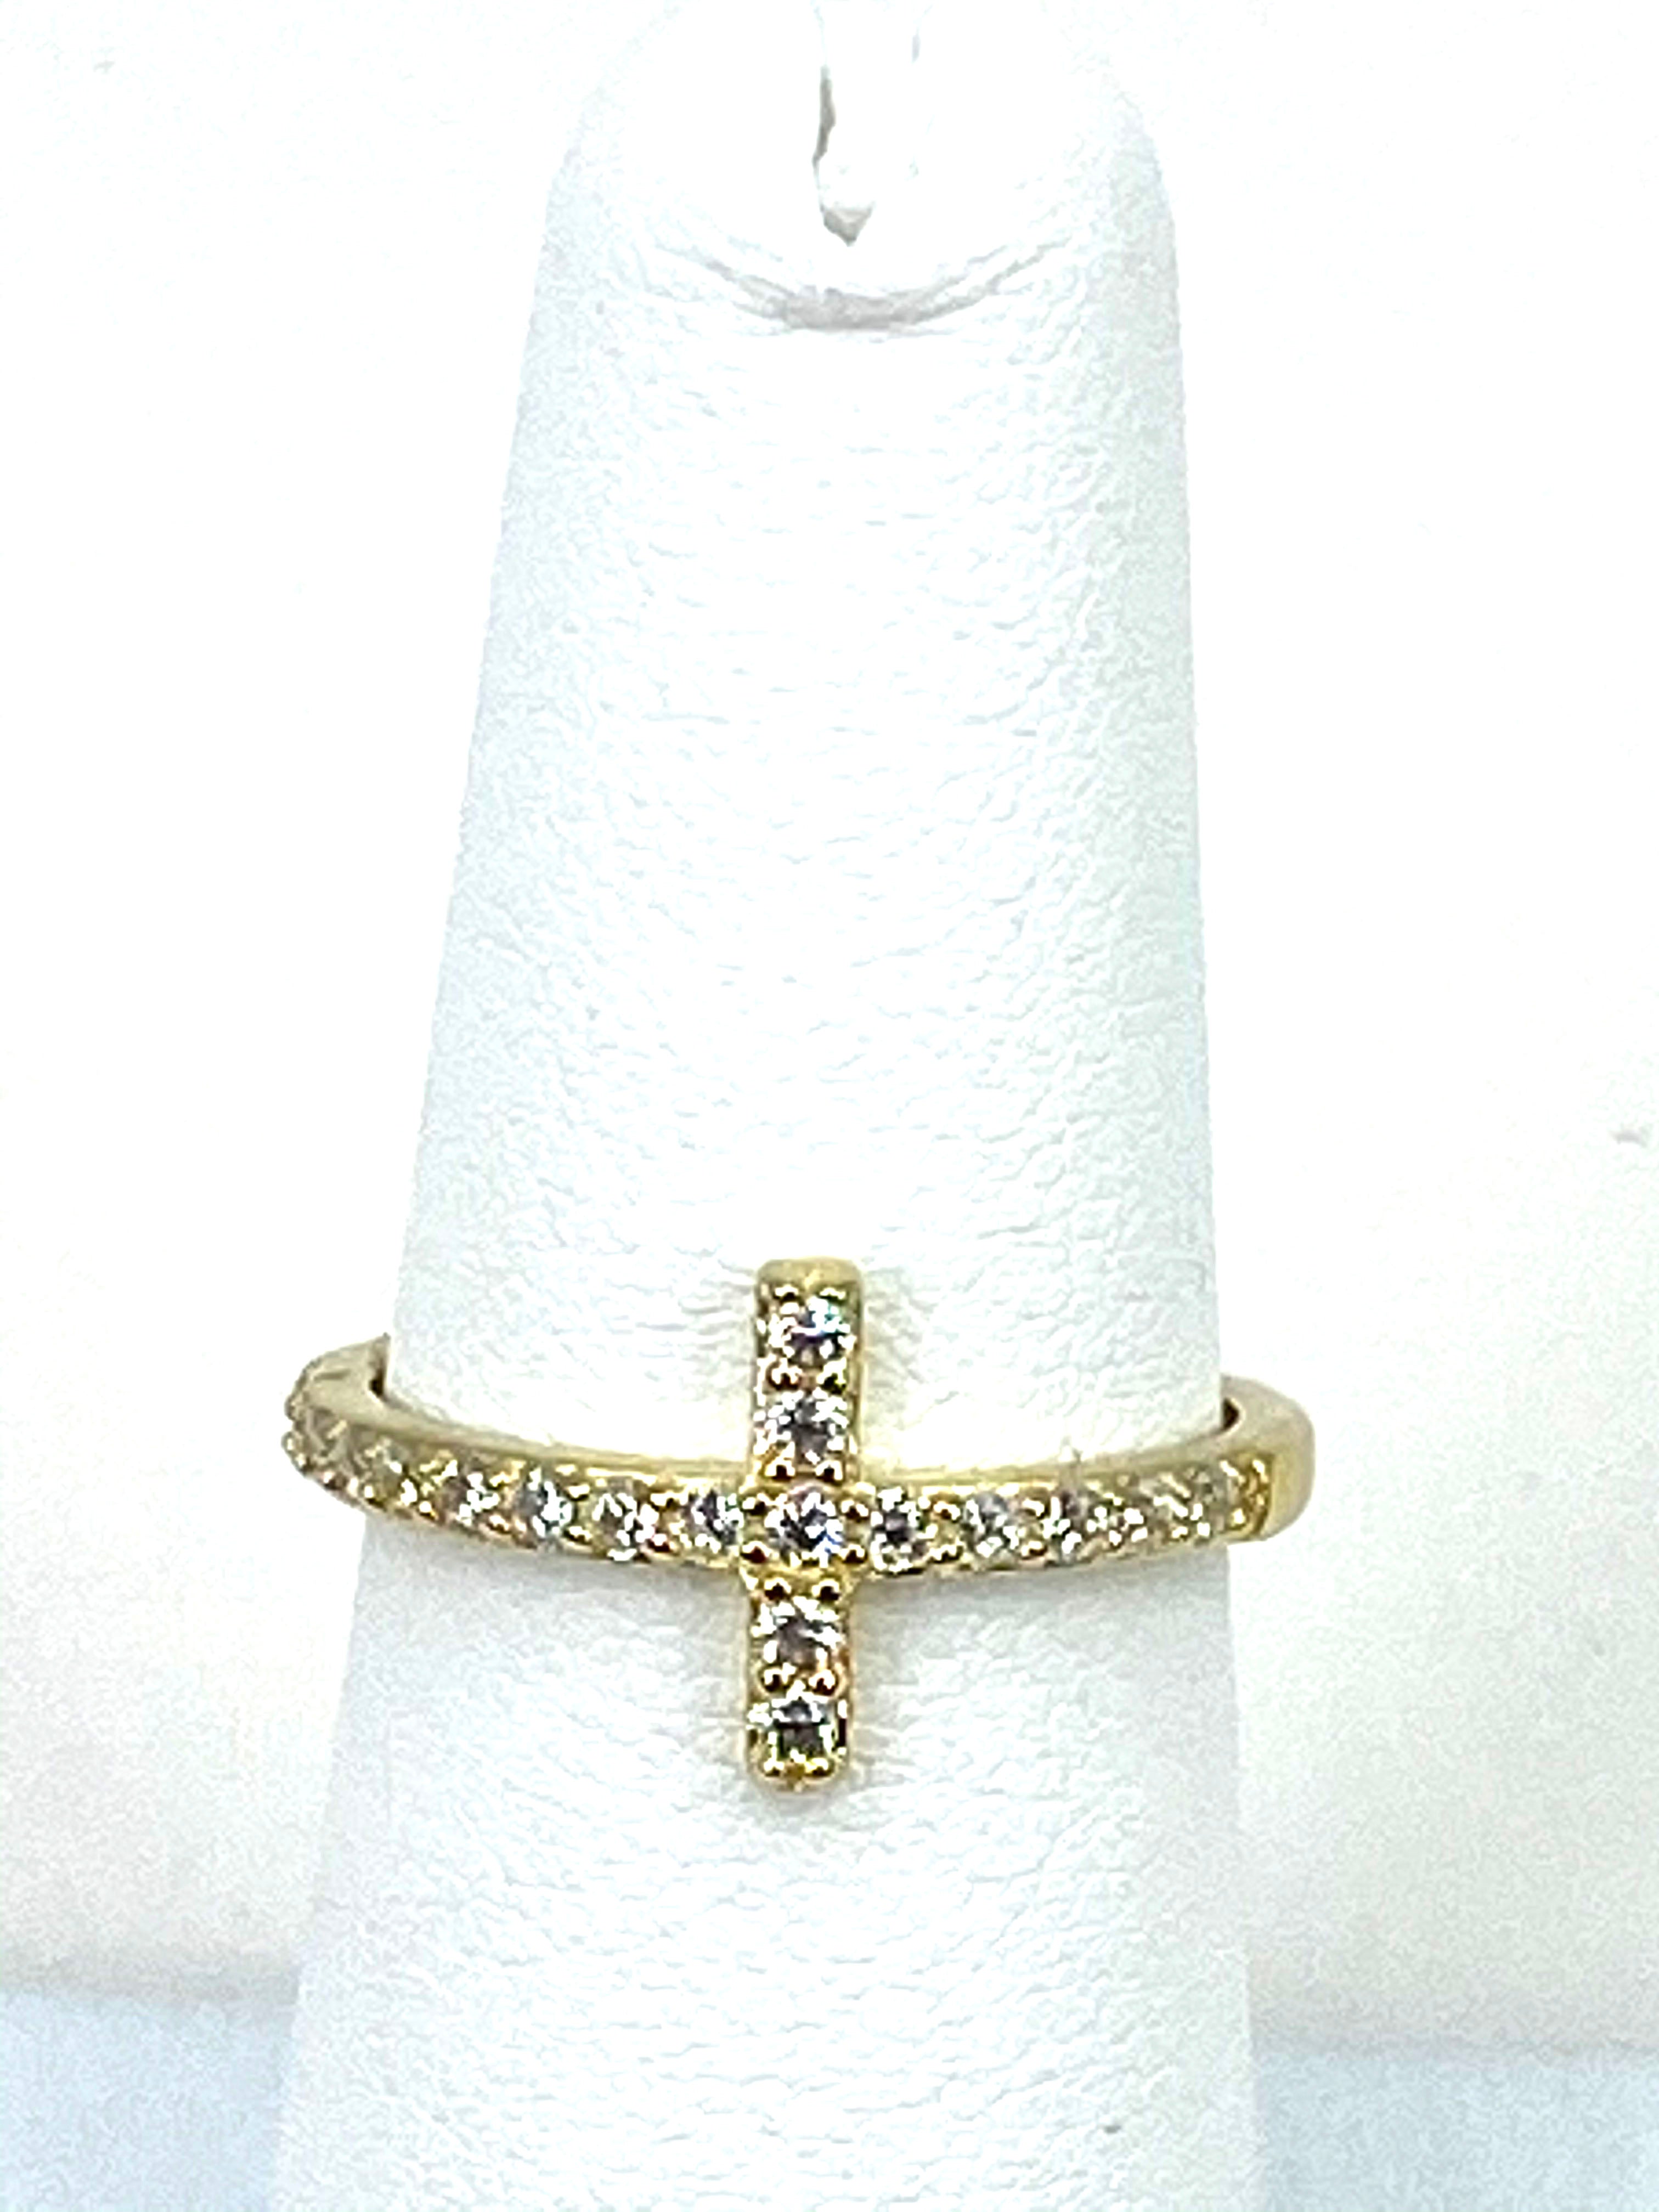 Cross Ring of Sterling Silver 925 Gold-Plated Beaded